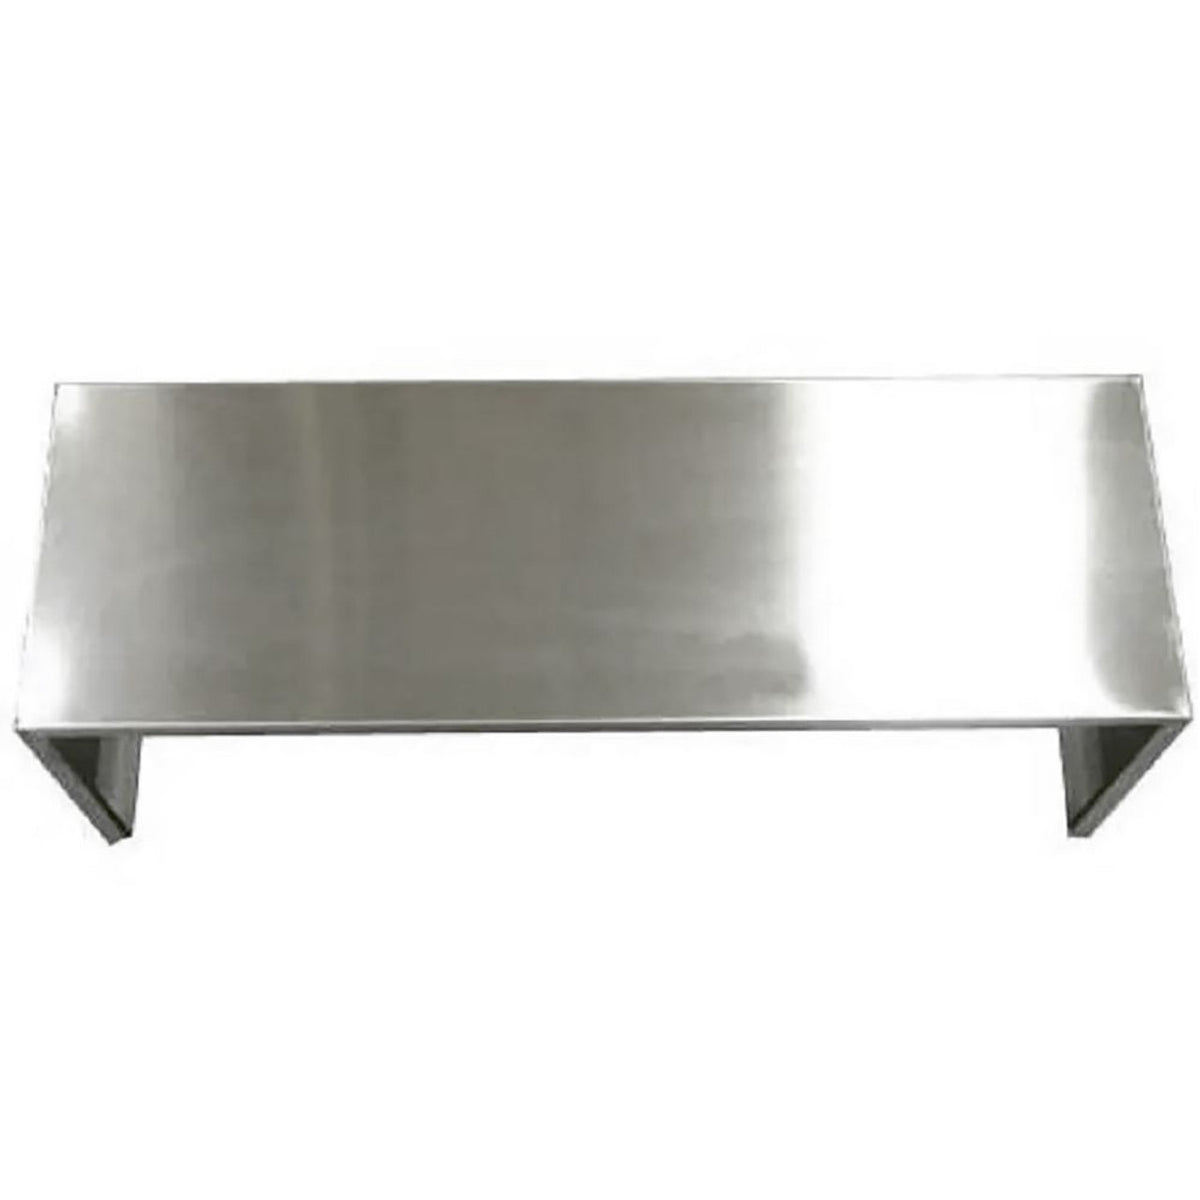 Bull 18x15x10 Inch Stainless Steel Single Duct Cover